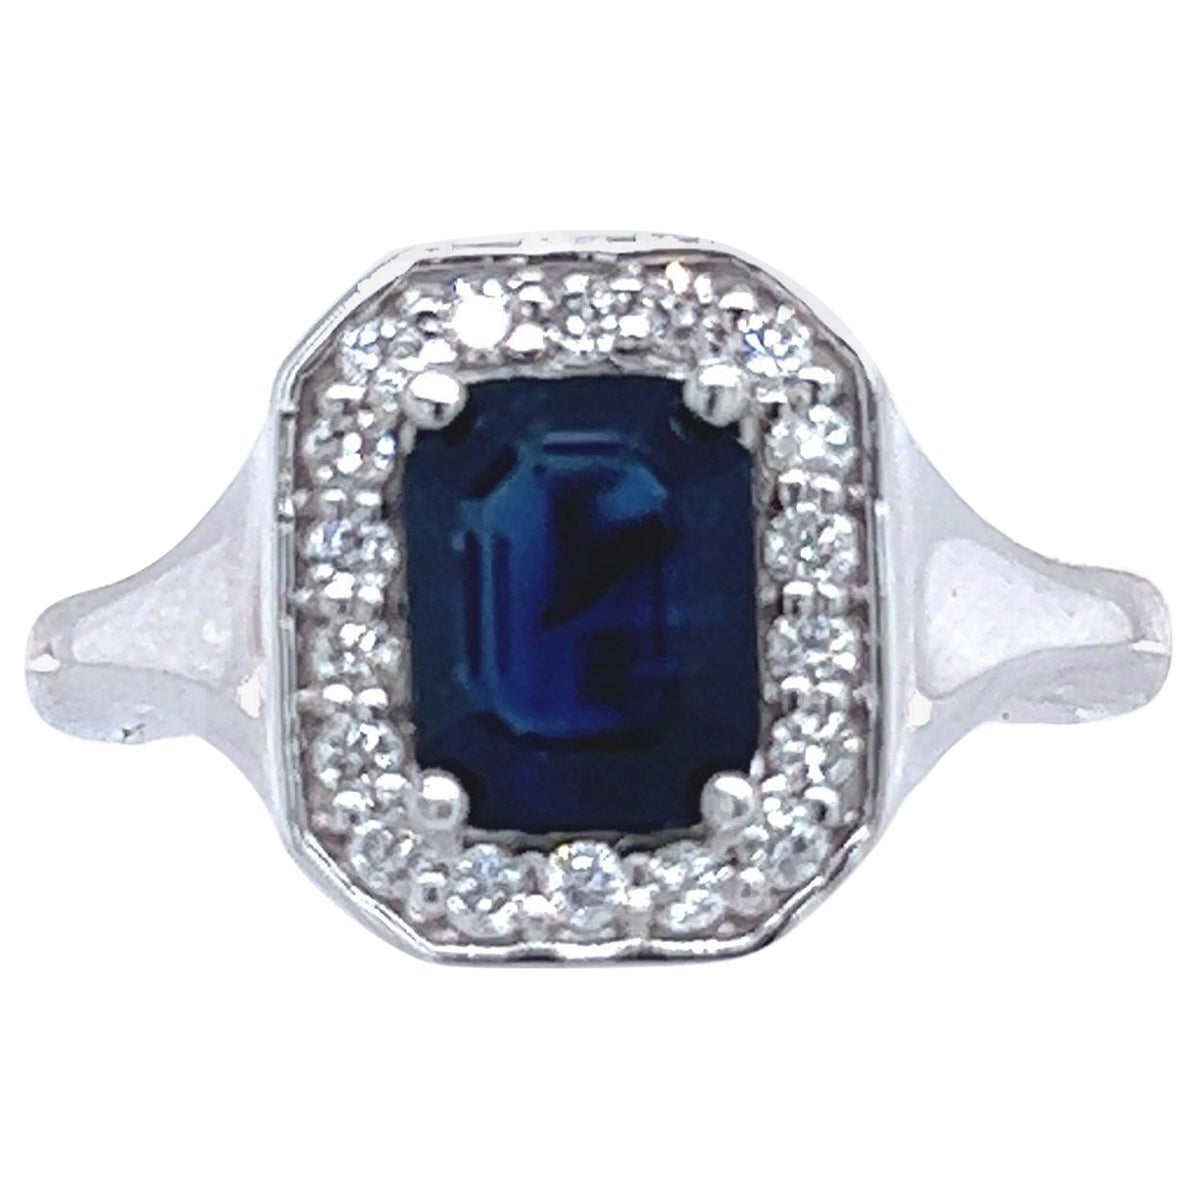 Natural Sapphire Diamond Ring 14k W Gold 1.82 TCW Certified